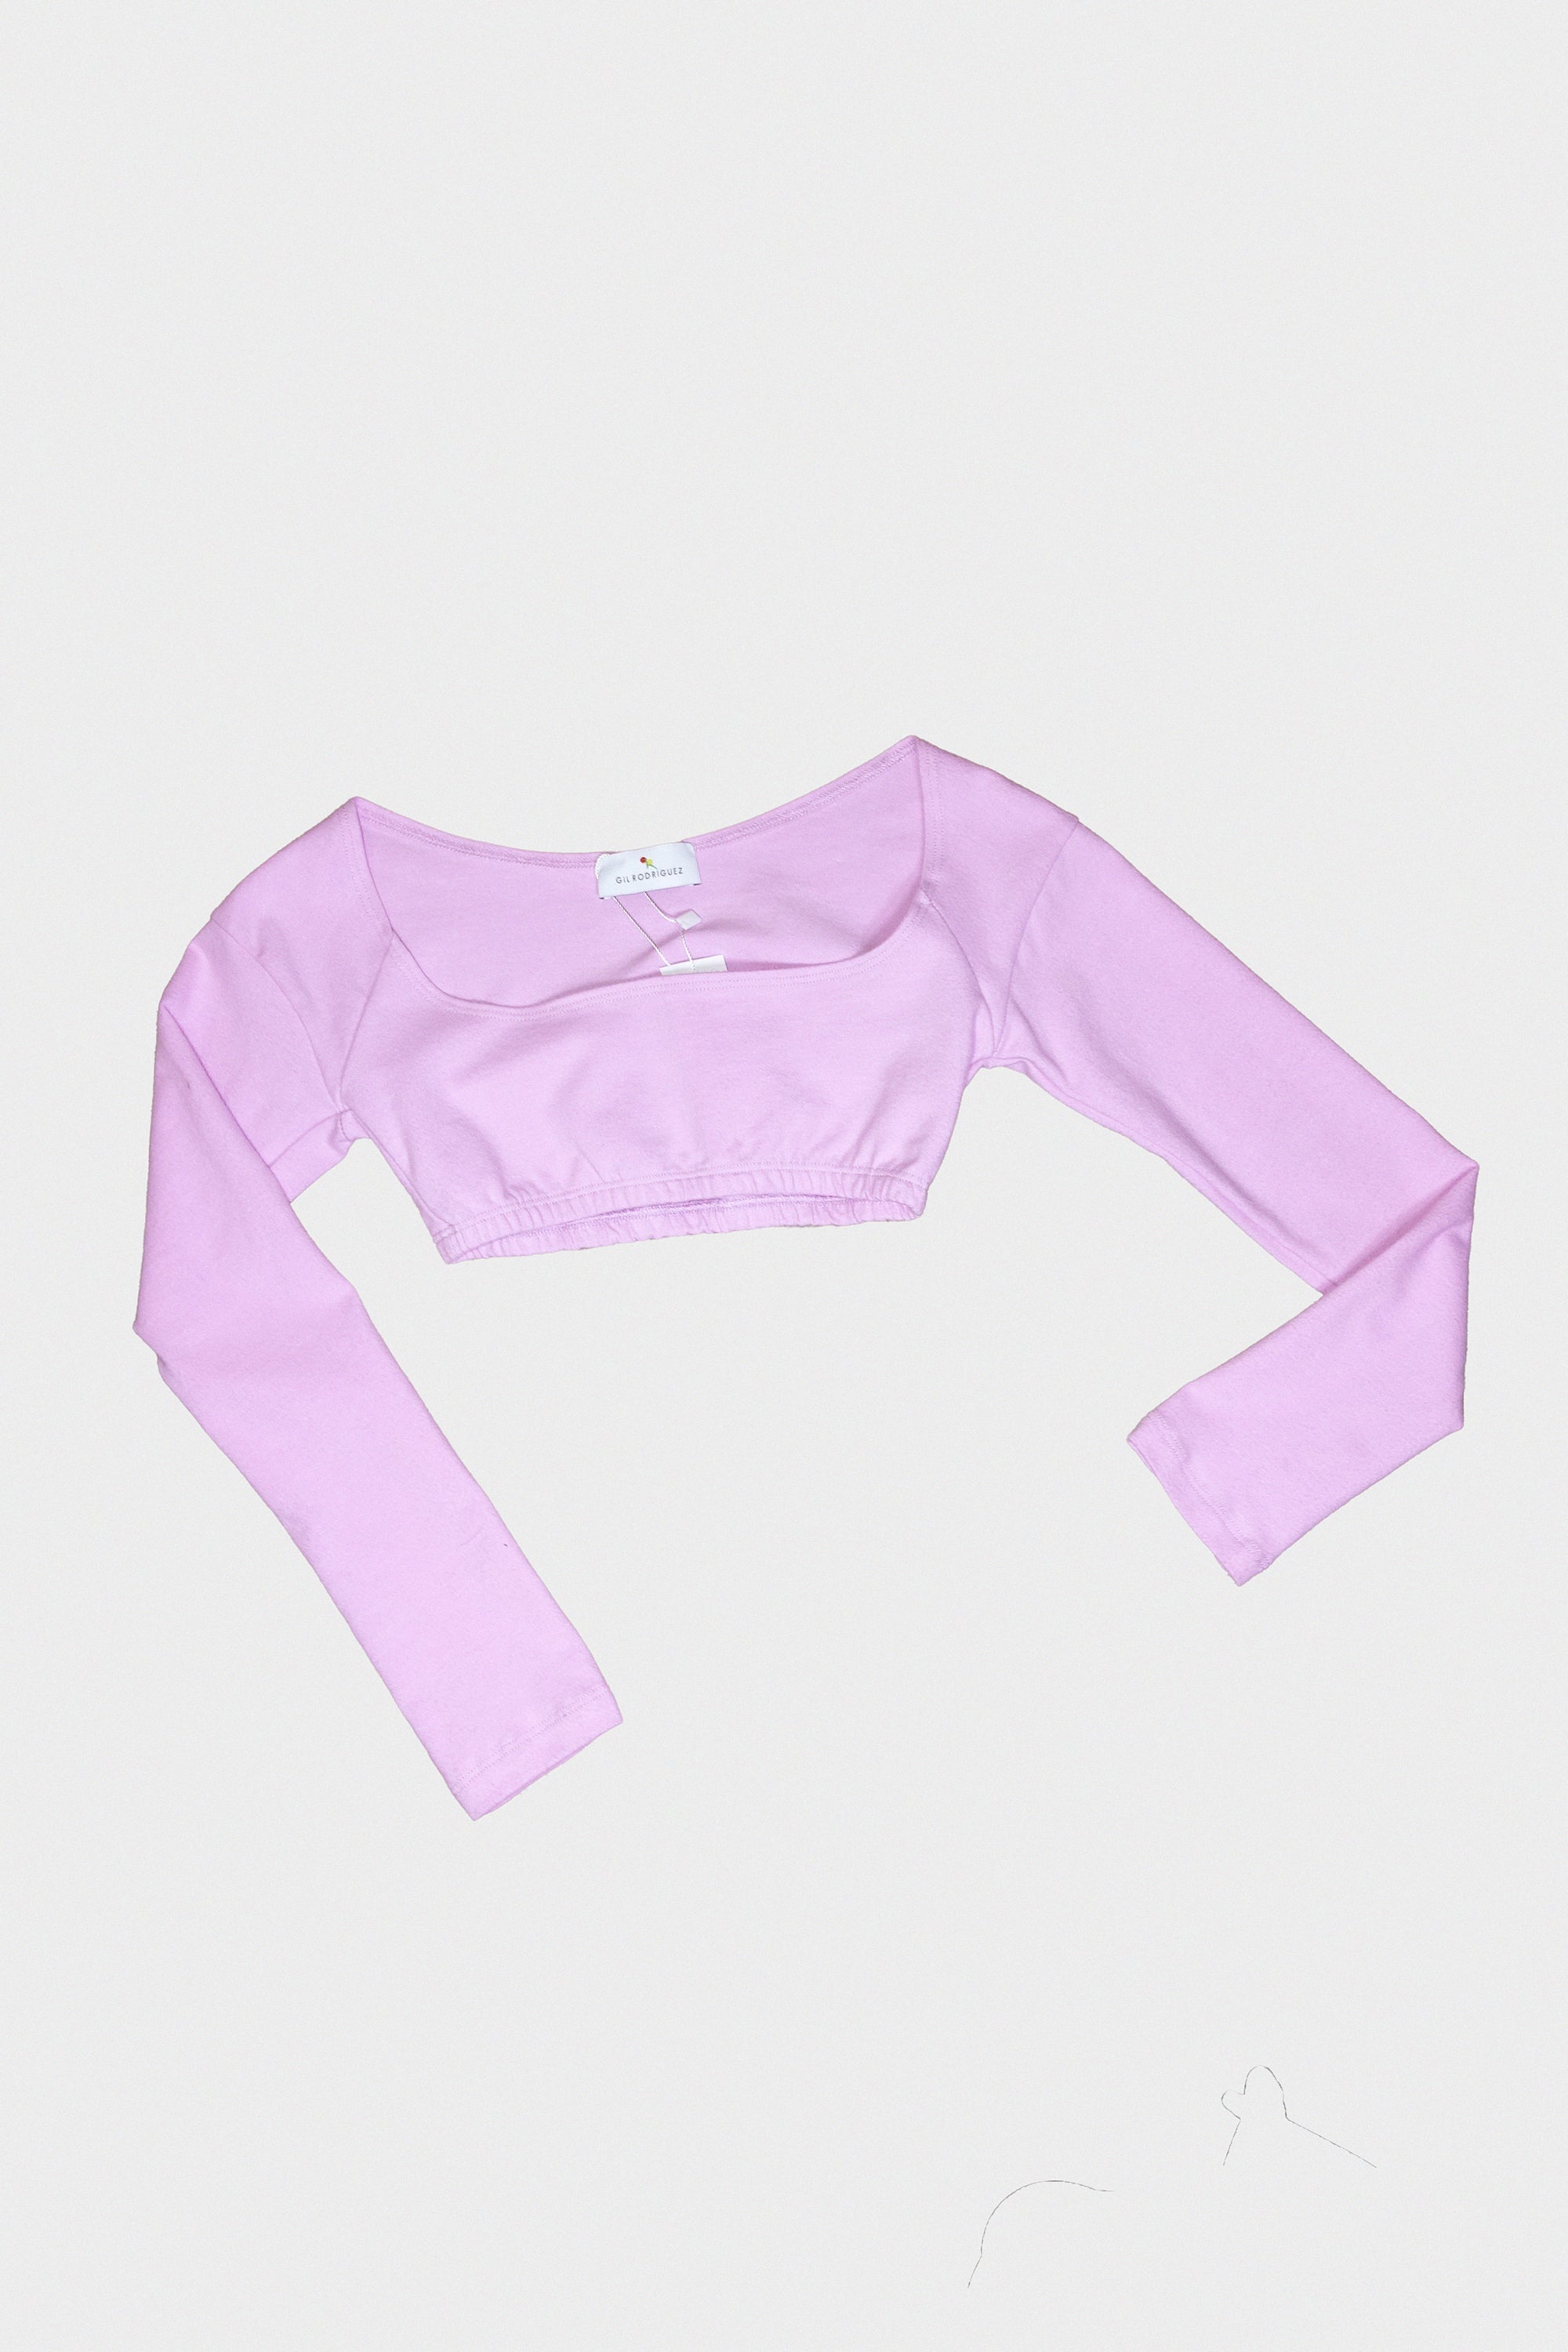 El Tigre Chiquito Long Sleeve Crop Top in Orchid